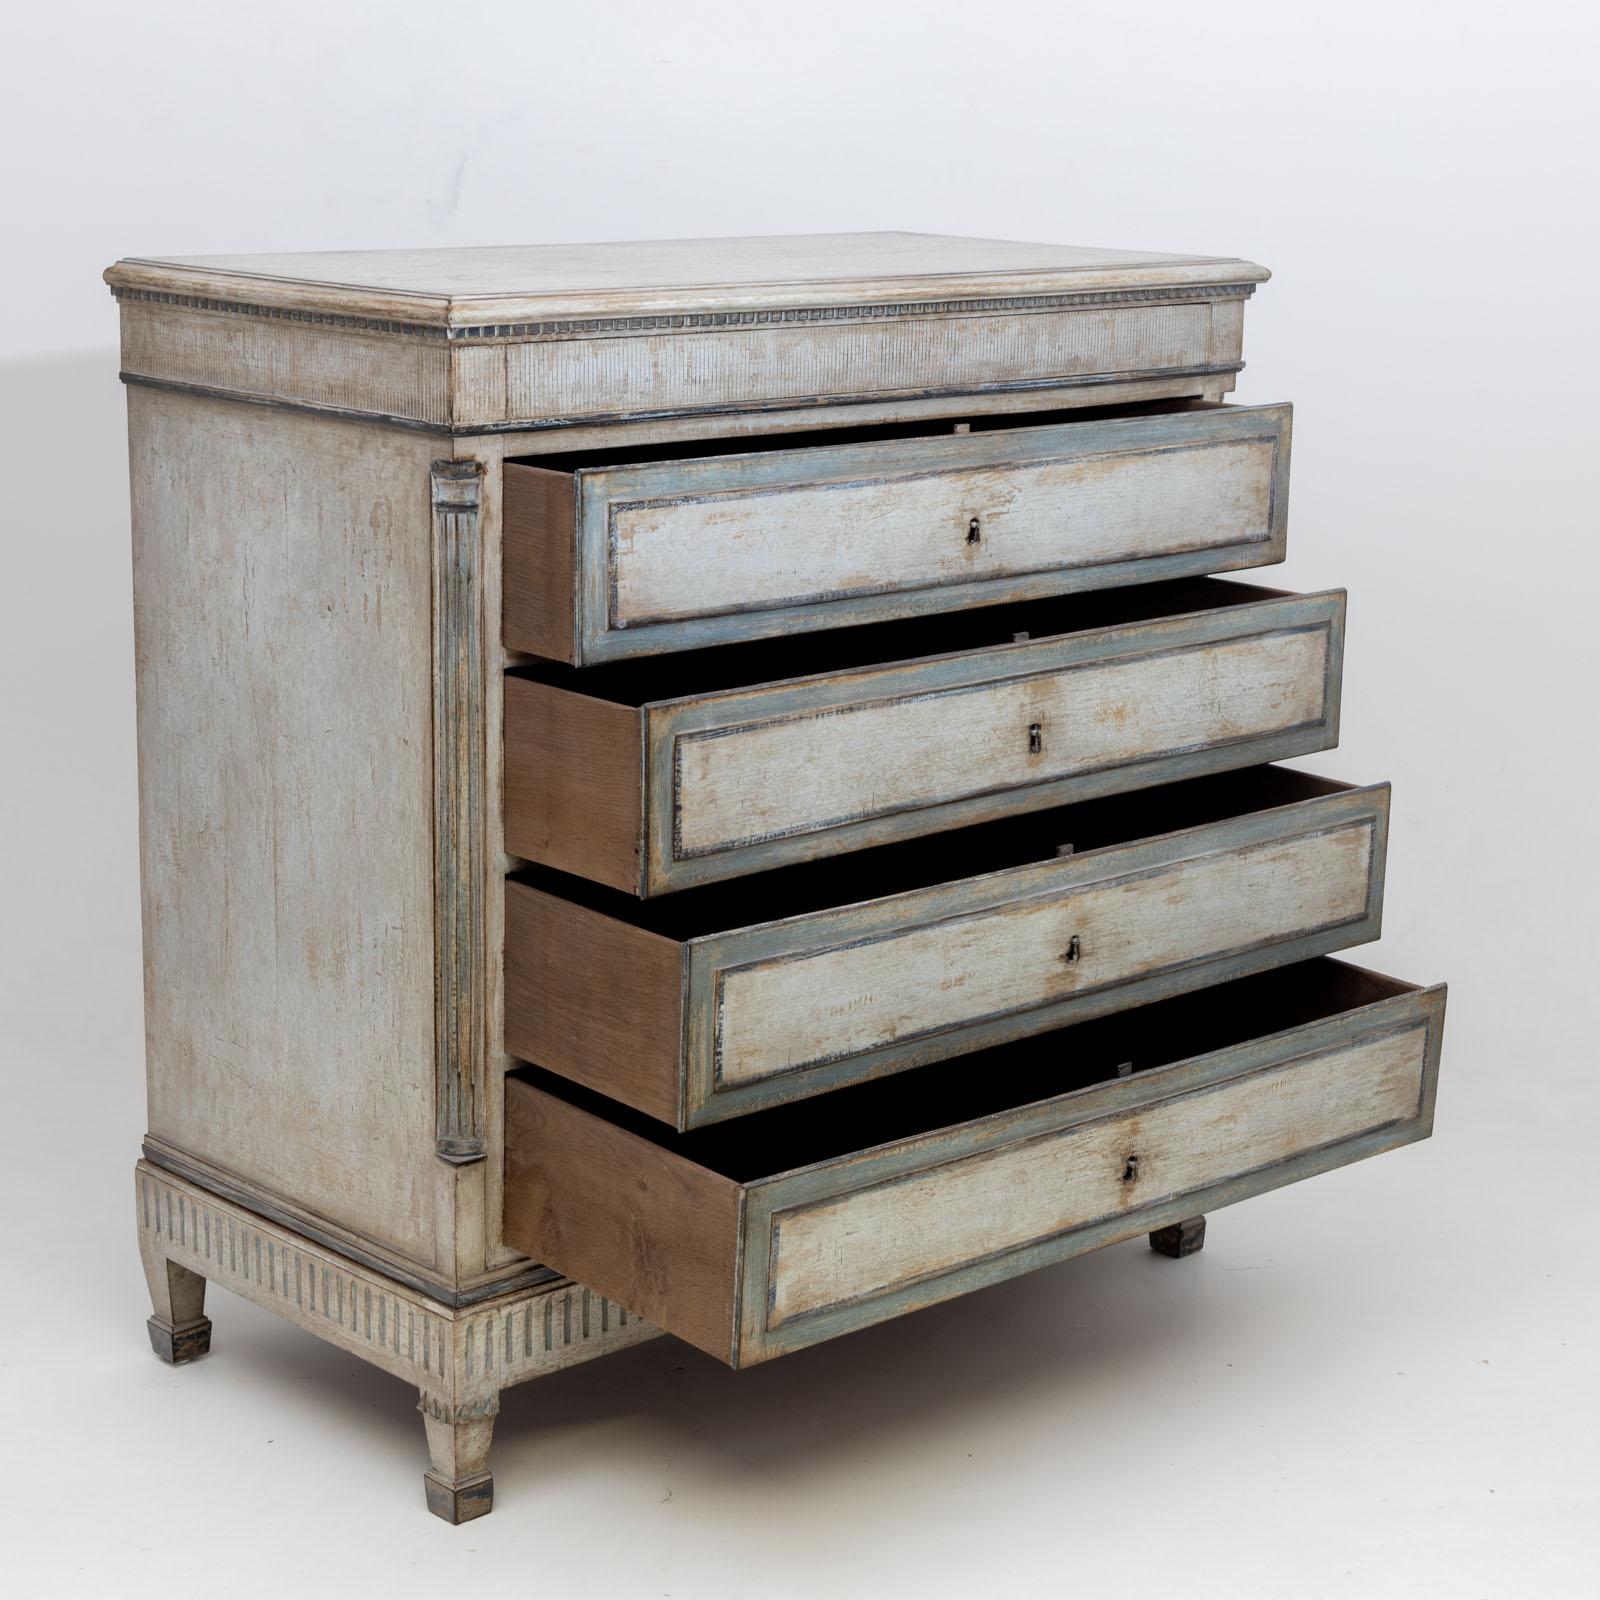 Large neoclassical chest of drawers with four drawers and a shallow drawer in the upper section. The chest of drawers is decorated with fluted quarter columns at the corners and a dentil frieze under the top panel. The light blue and cream-white